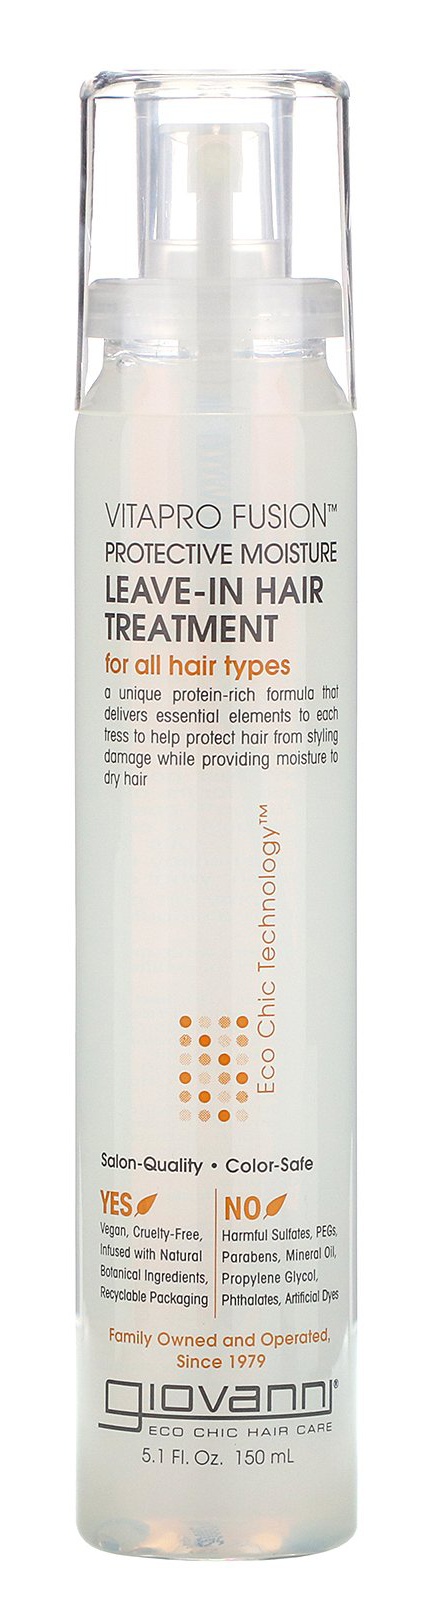 Giovanni Vitapro Fusion™ Protective Moisture Leave-in Hair Treatment